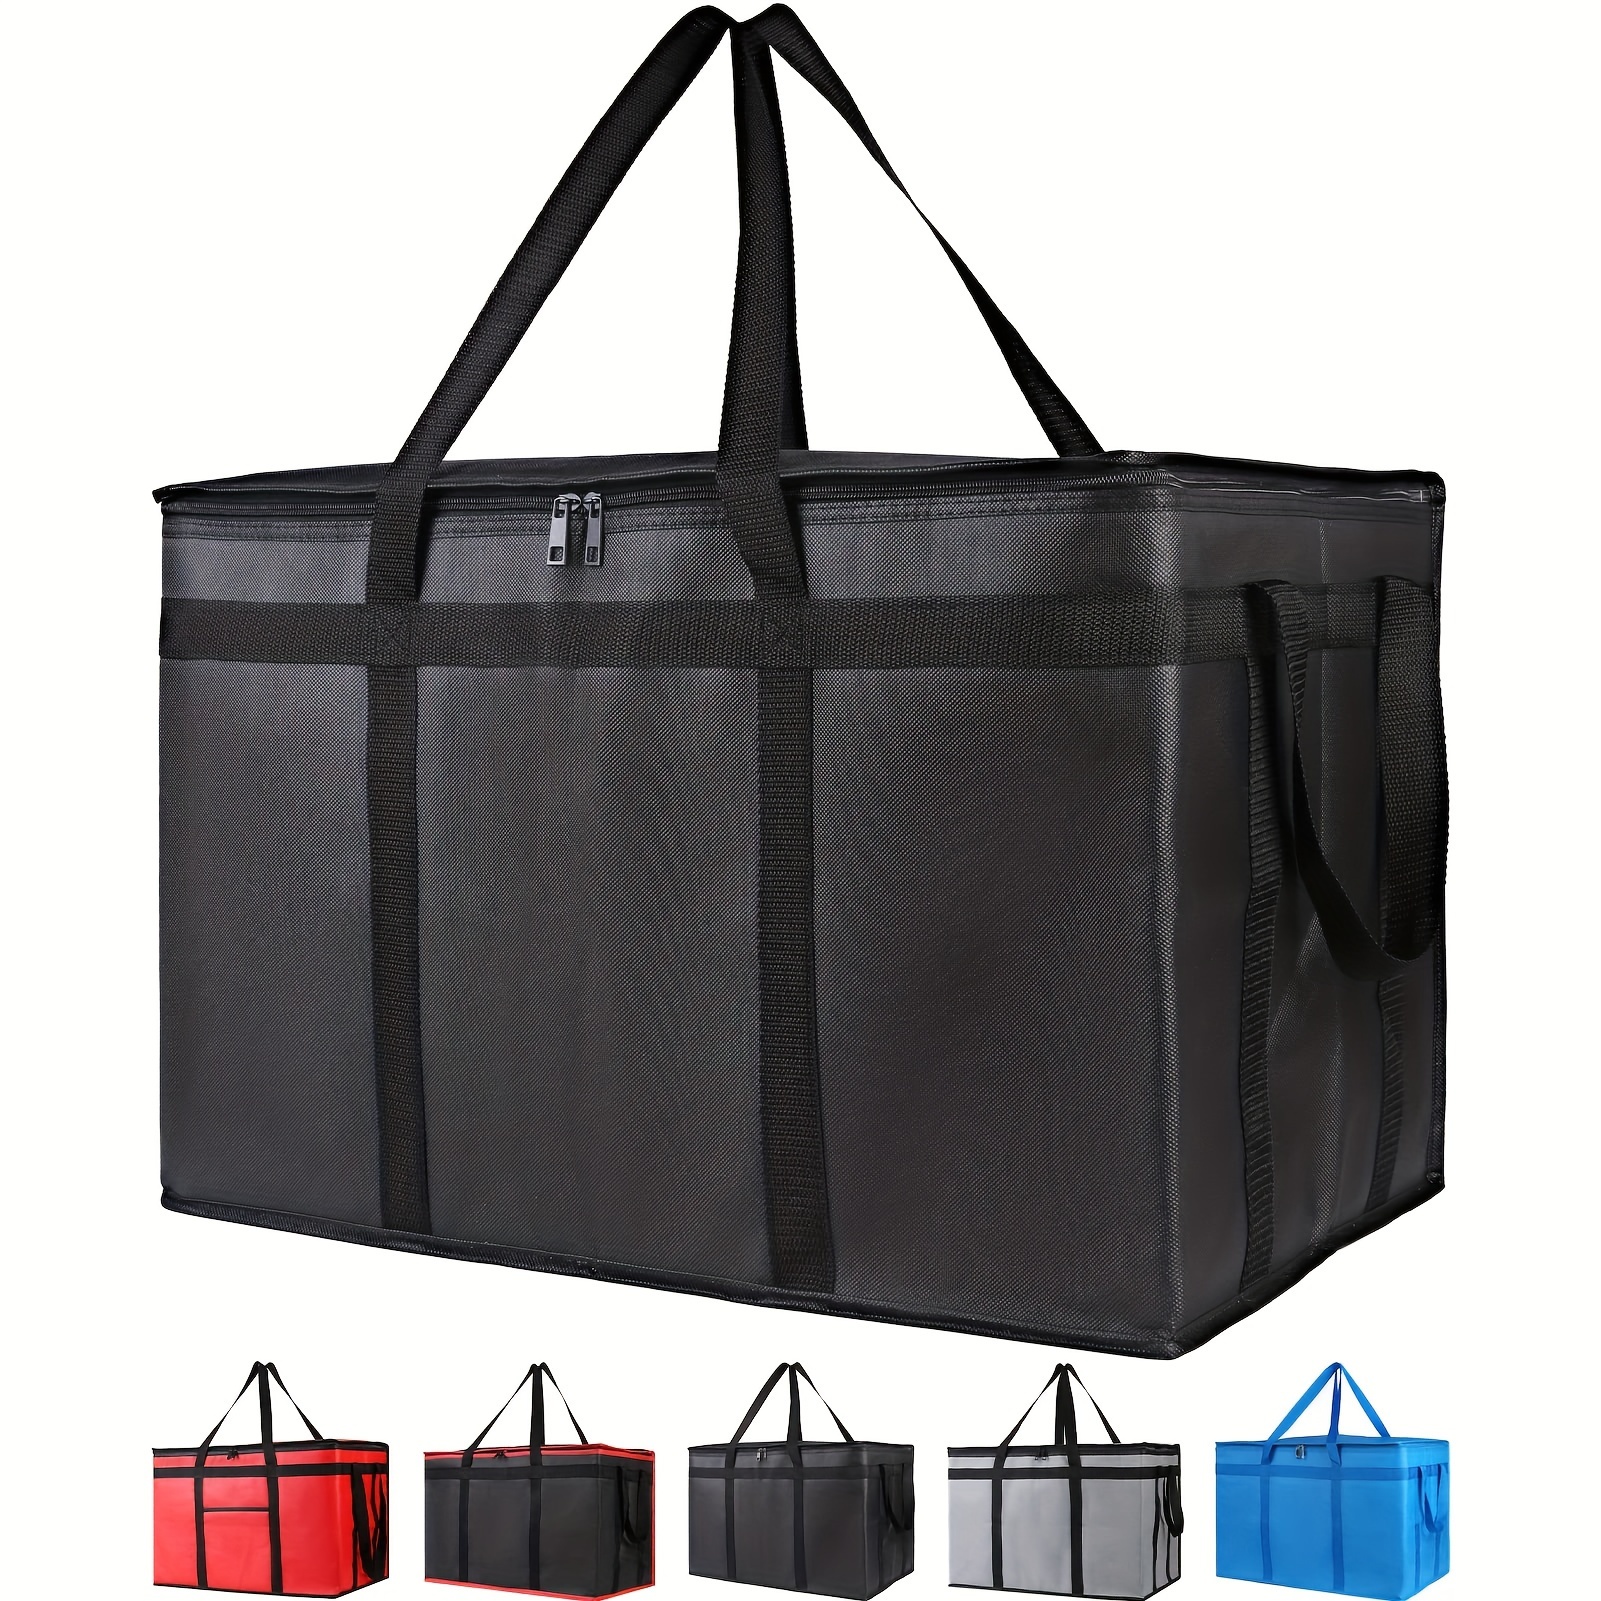 

Extra Large Xxxl Insulated Food Delivery Bag Cooler Bags Keep Food Warm Catering Therma Catering Bag For Doordash 22x14x13 Cooler Bags Therma Shopper Hot Xxxl Warming Pizza 22w X 14 L X 13d